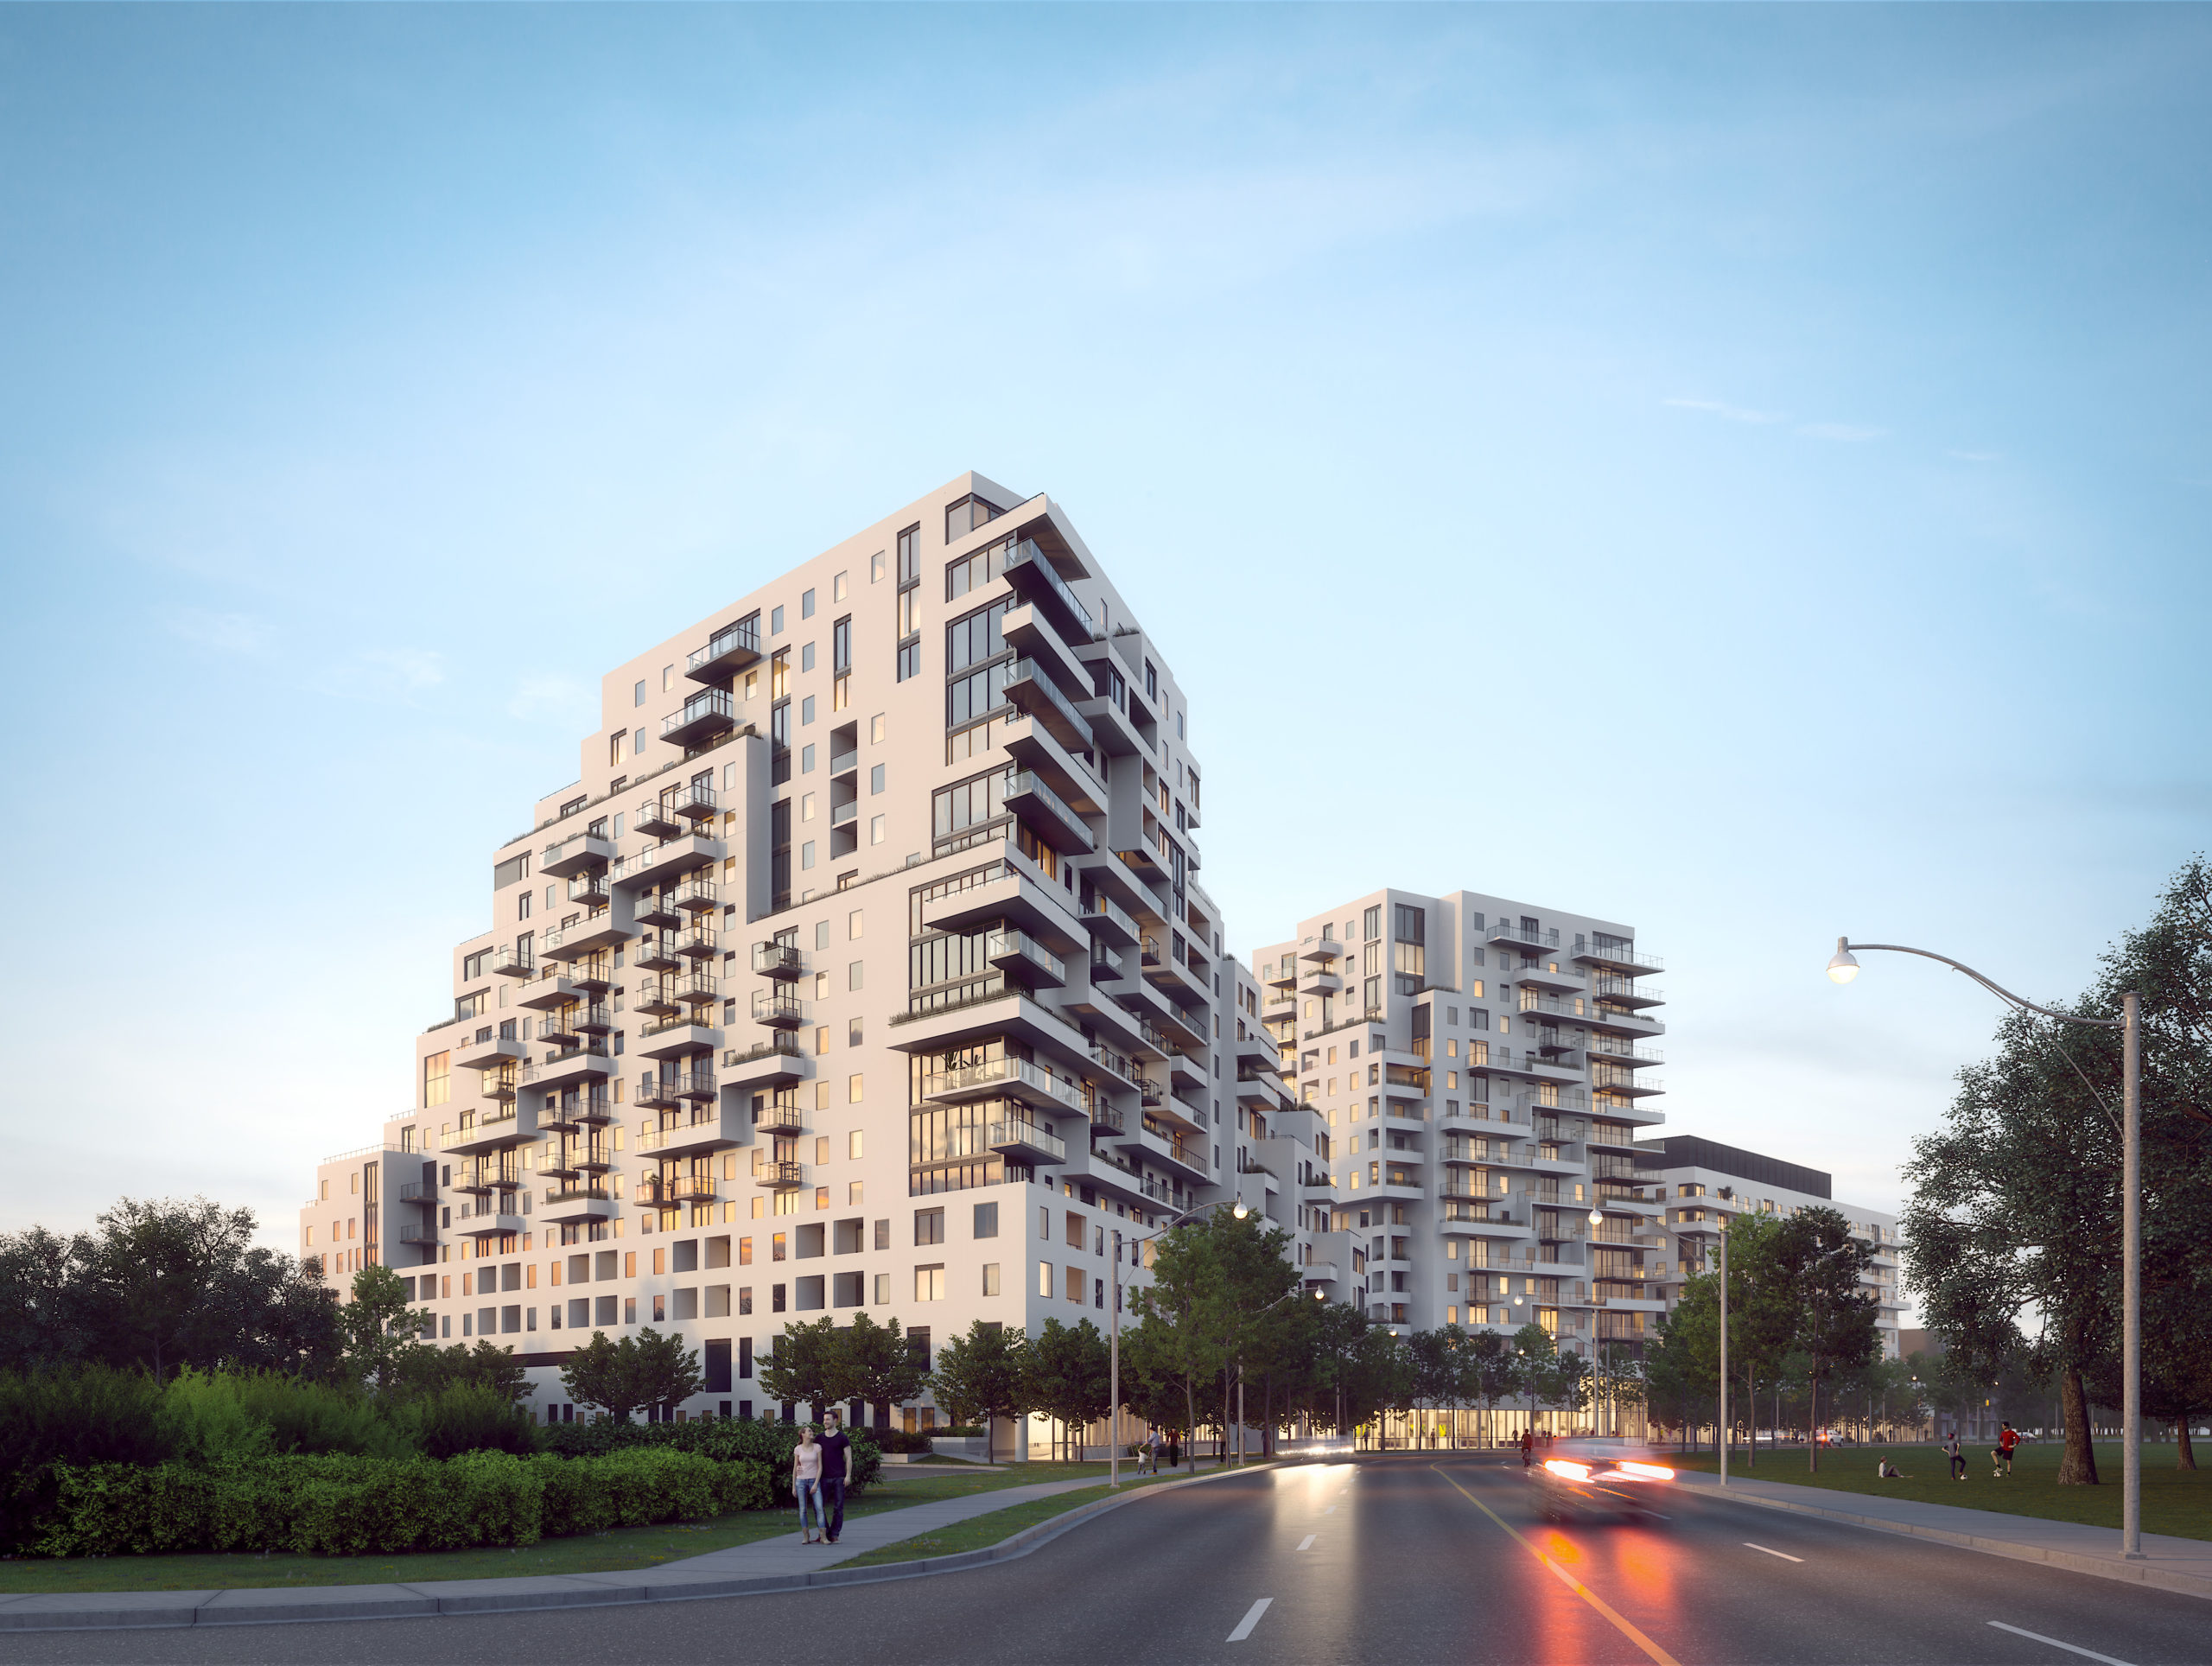 Evening street view of Queen & Ashbridge rental residences with green space in foreground.